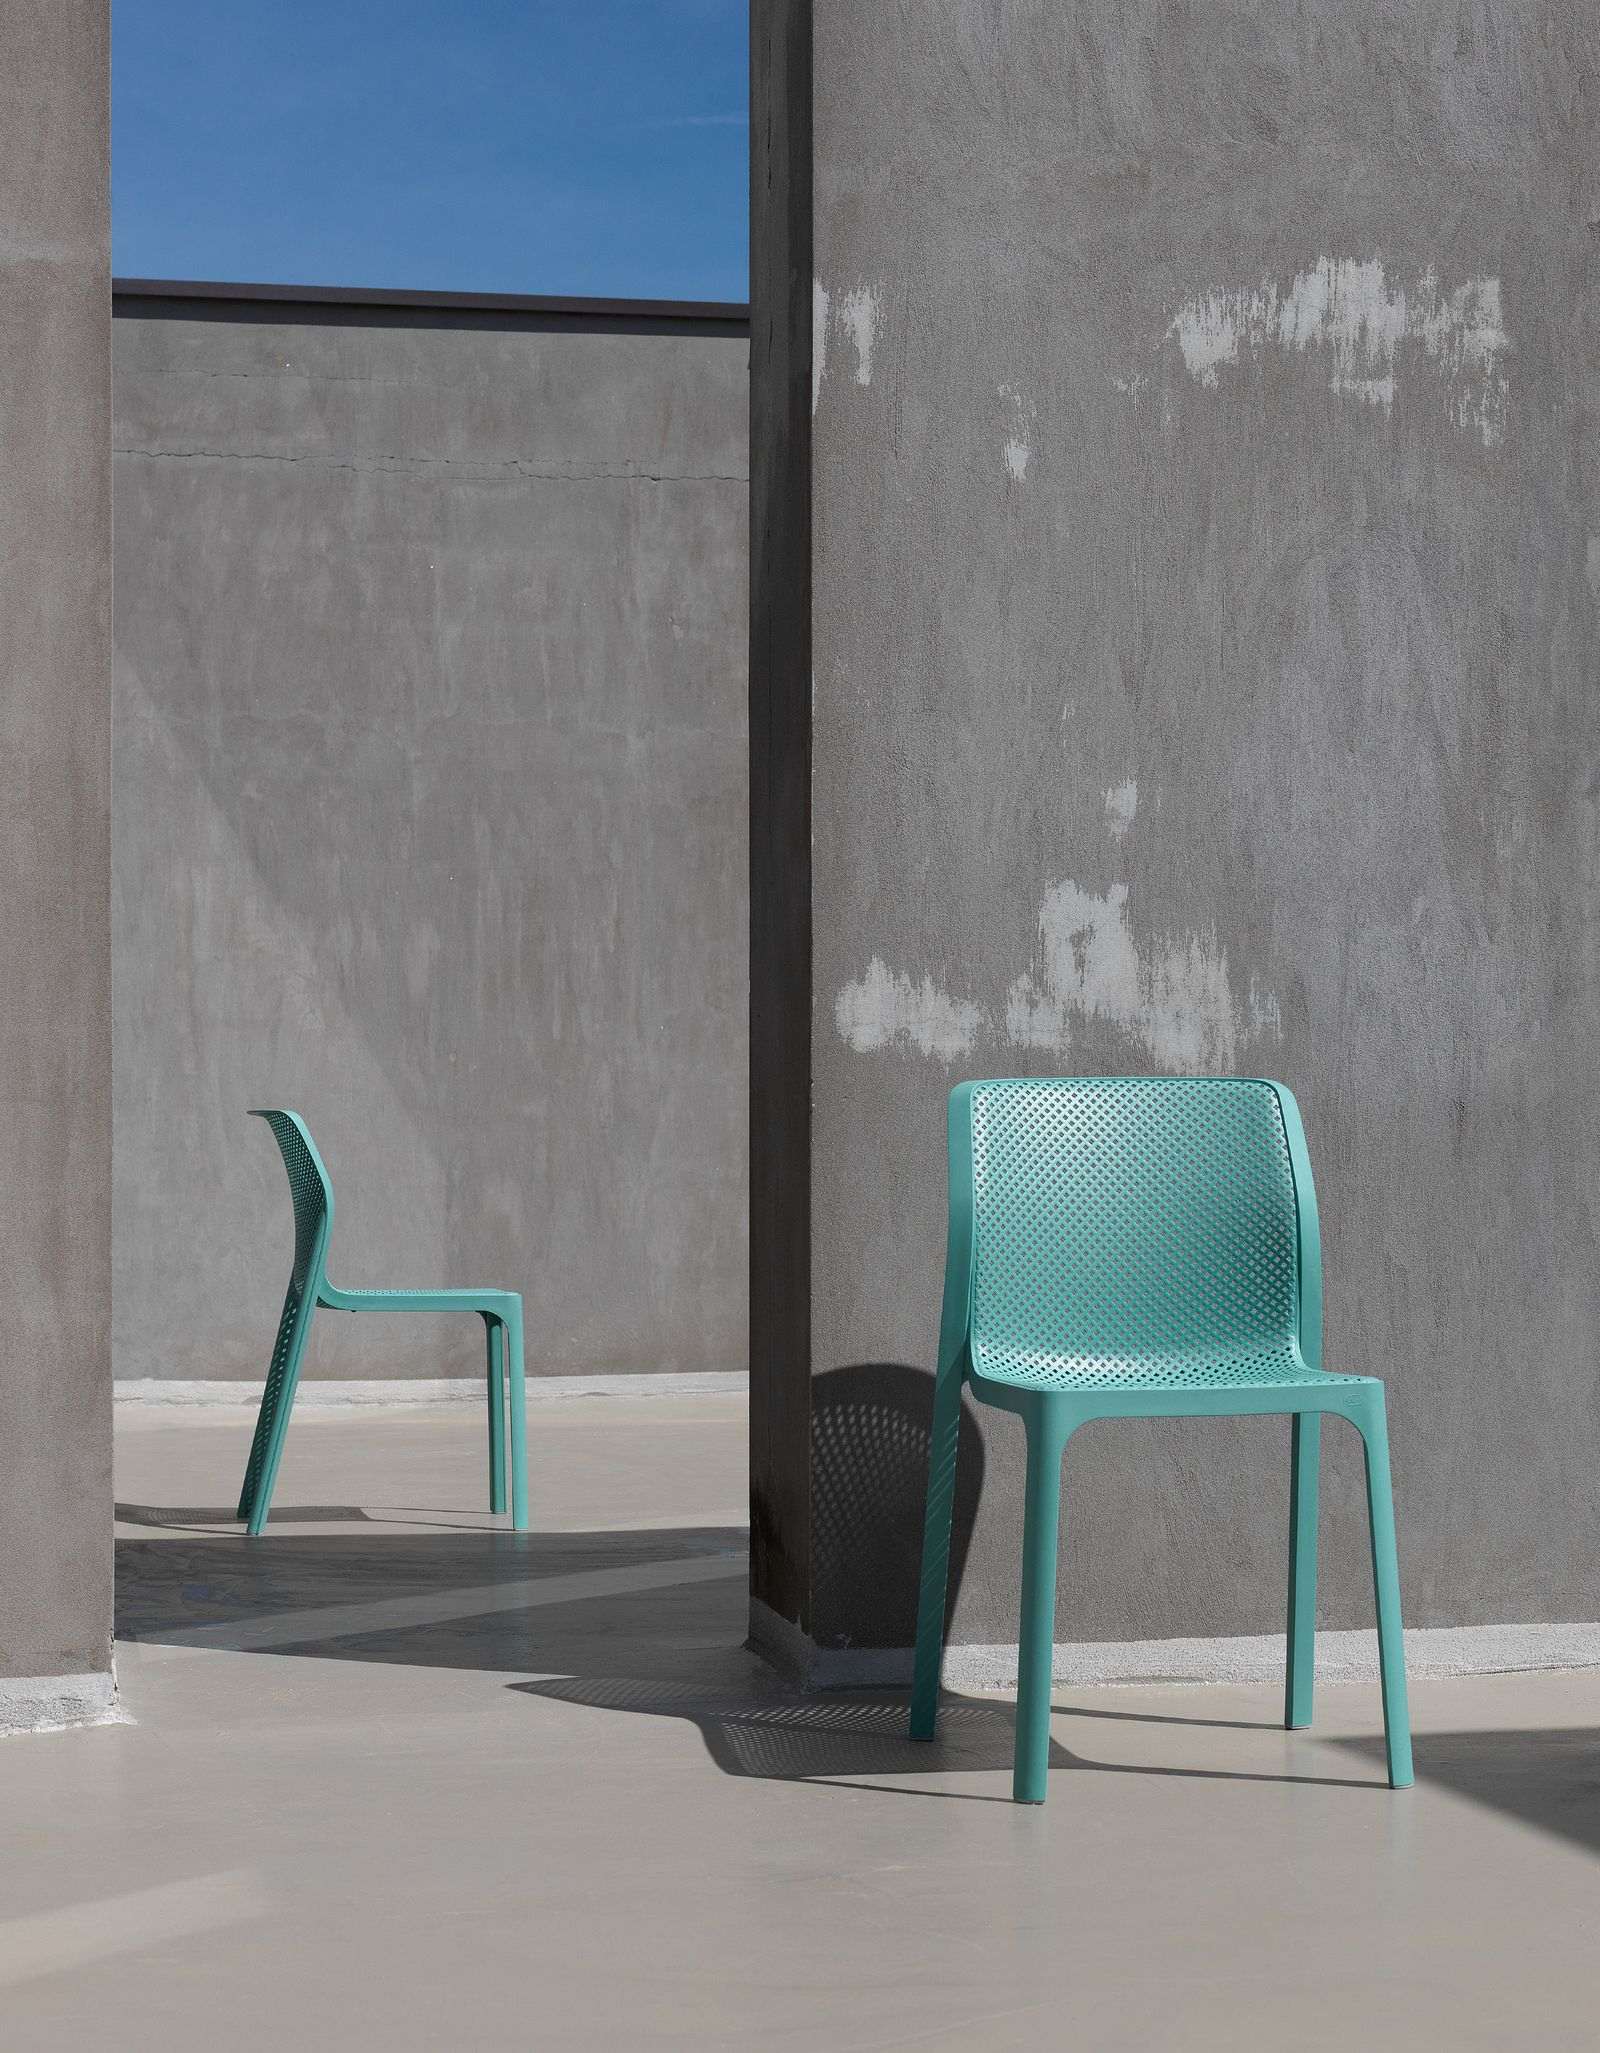 Remarkable Outdoor Living: Nardi Bit Outdoor Resin Dining Chair. Two modern turquoise chairs are positioned on a smooth concrete surface, creating a stark contrast against the gray backdrop, with the clear blue sky peeking from above.